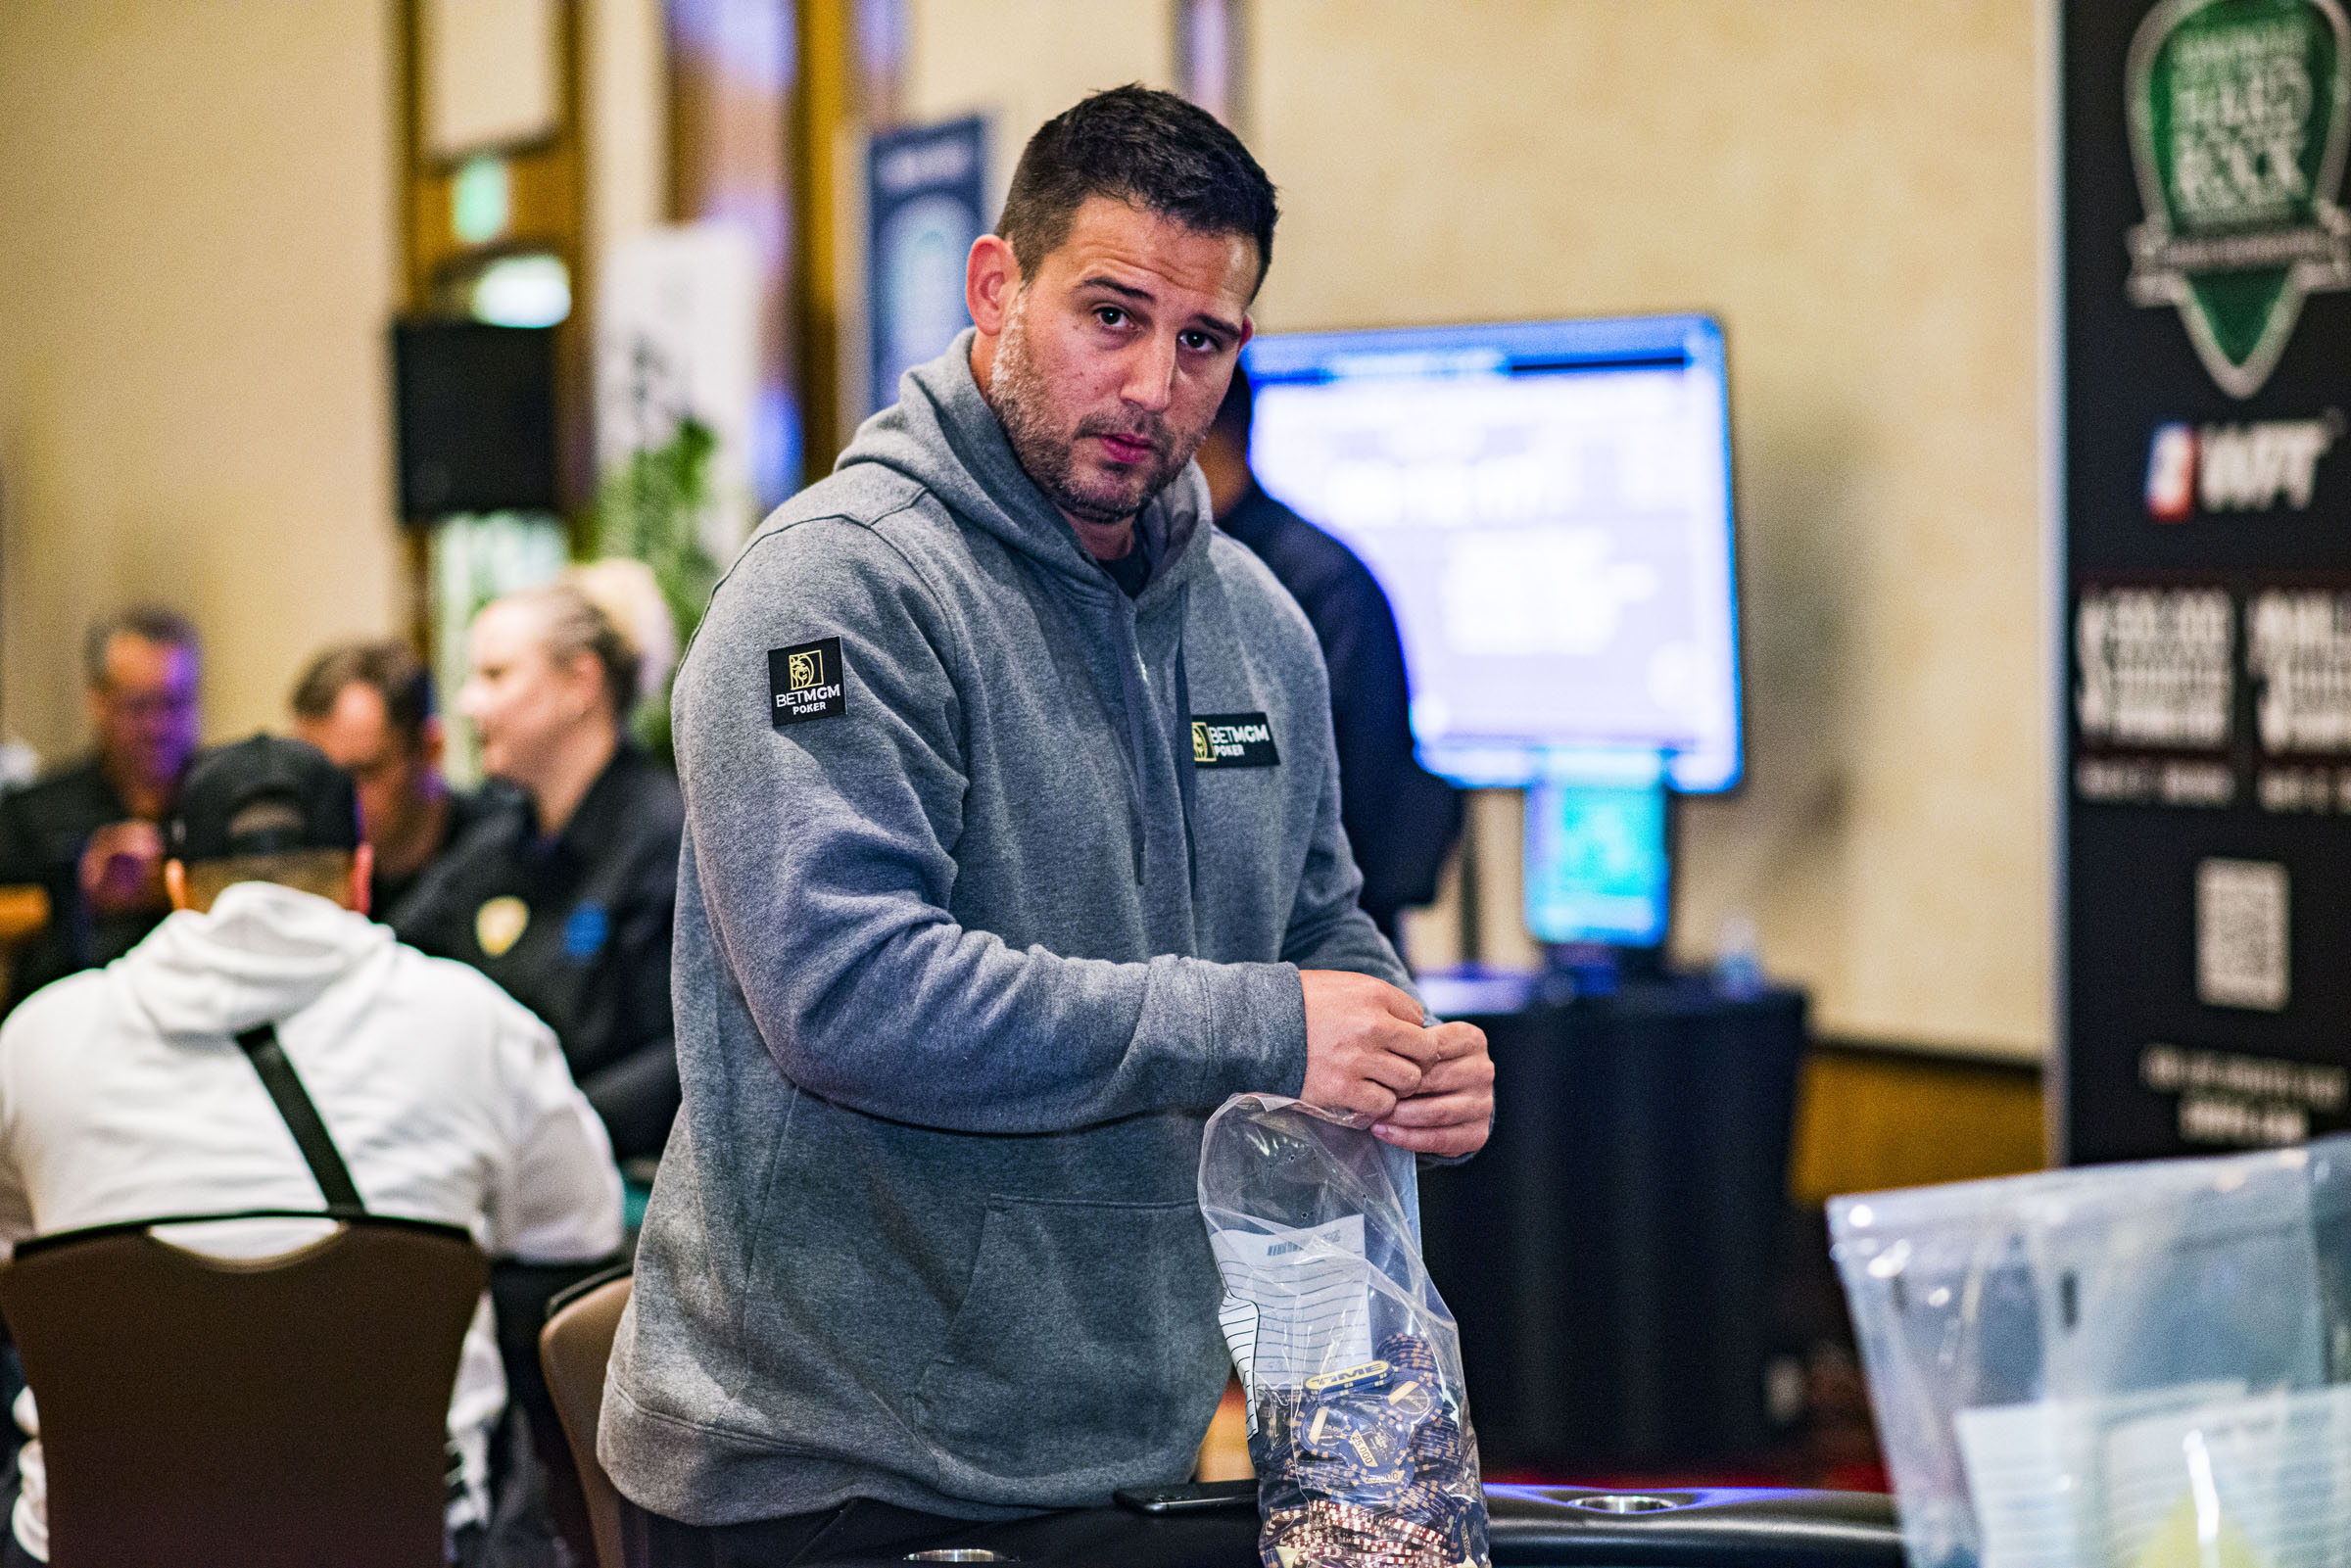 16 Remain as Elias Busts Hendrix to End Day 3 in WPT SHR Poker Showdown